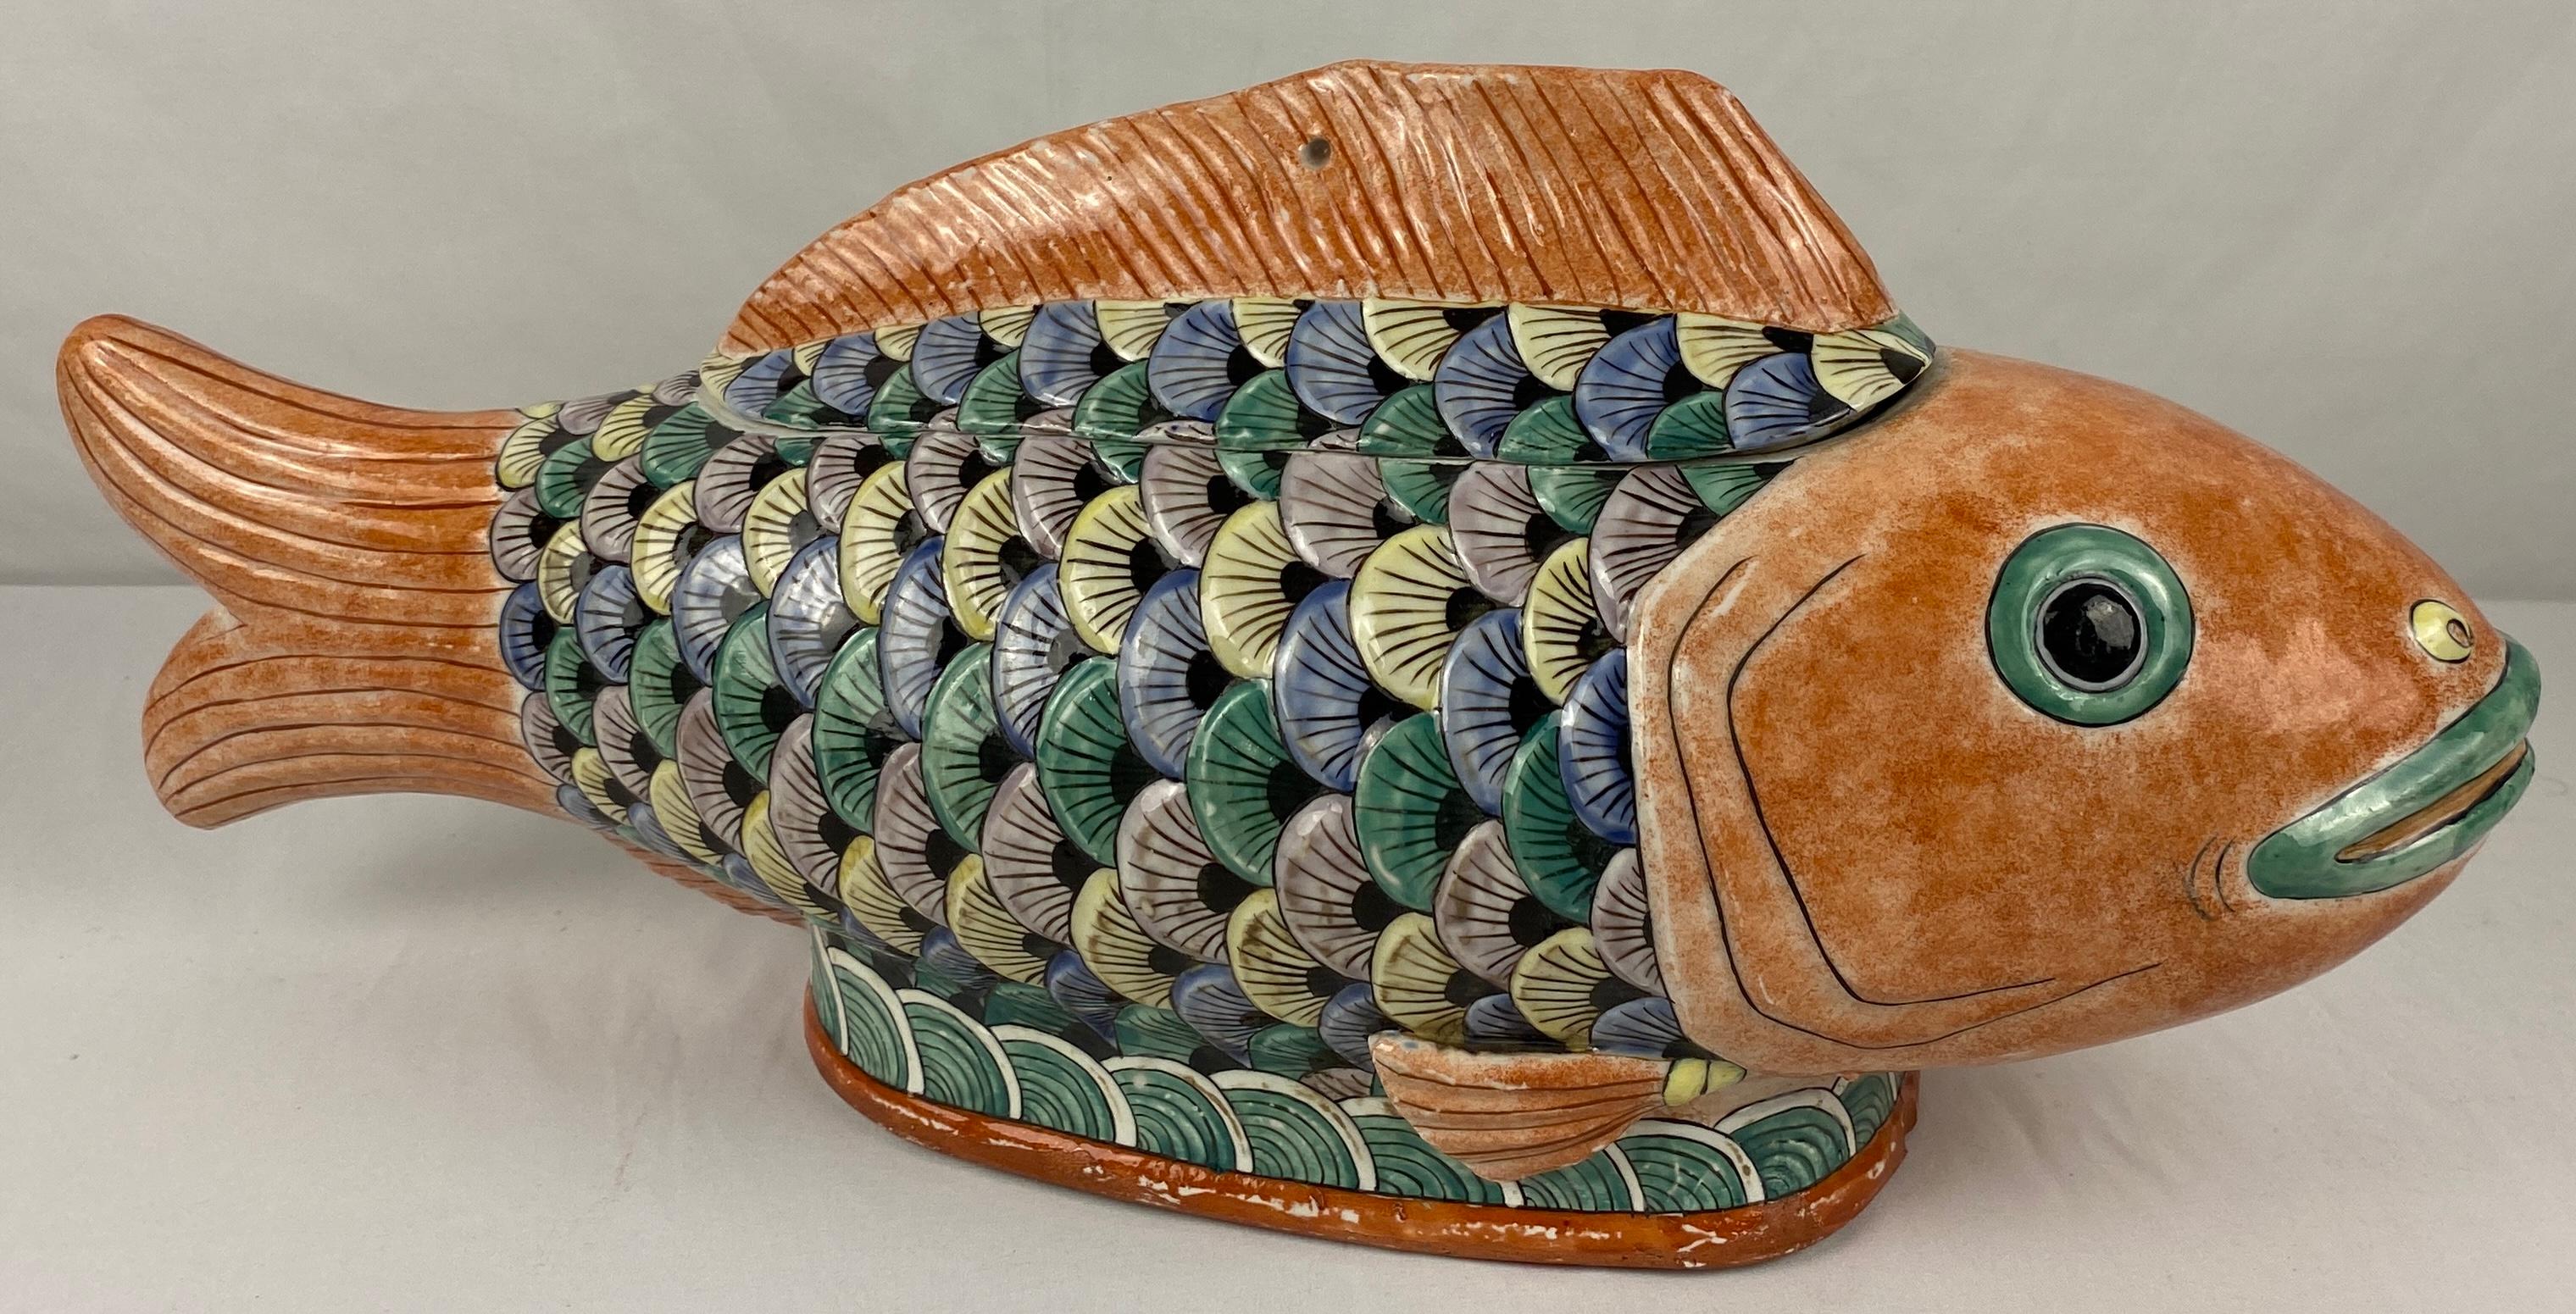 American Hand-Crafted Ceramic Fish For Sale